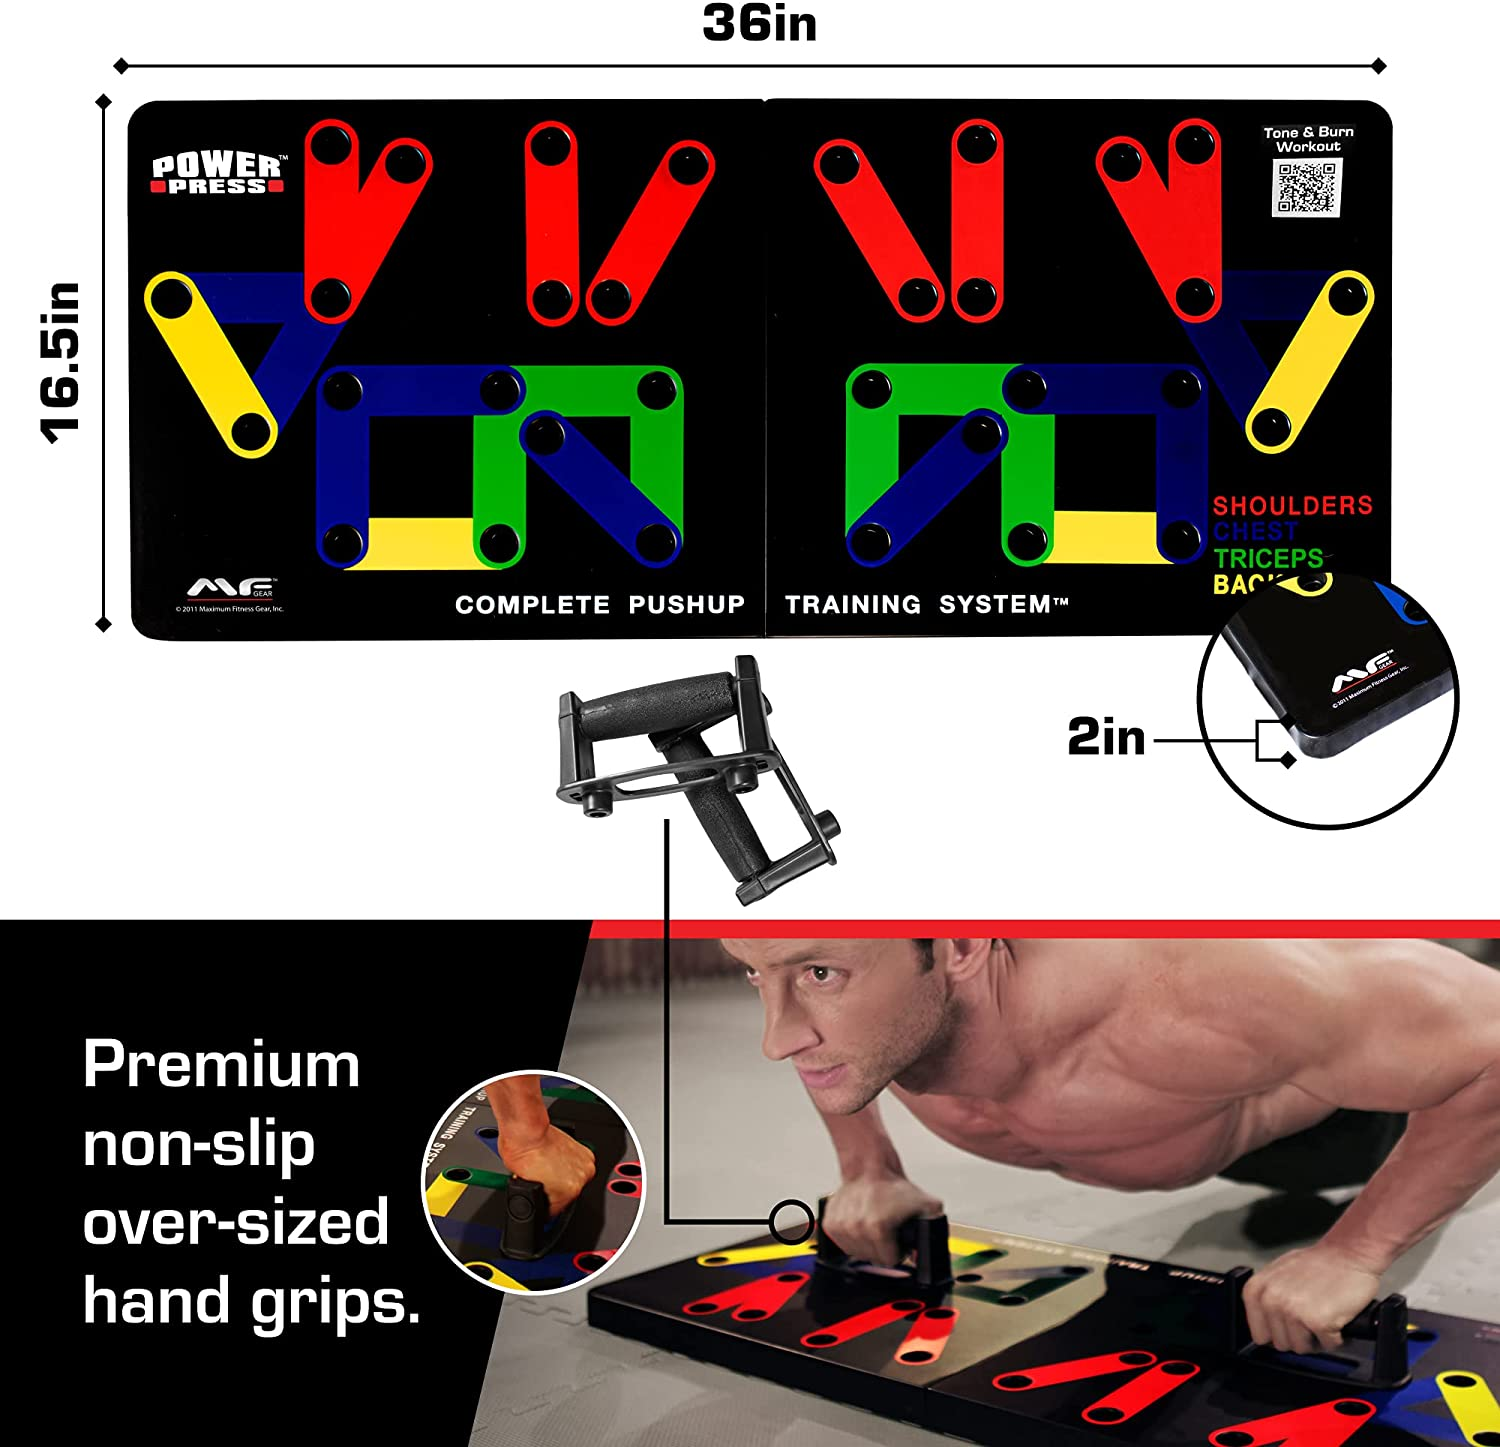 Power Press Push up Board – Home Workout Equipment, Push up Bar with 30+ Color Coded Combo Positions for Exercise – Portable Gym Accessories for Men and Women, Strength Training Equipment, Original